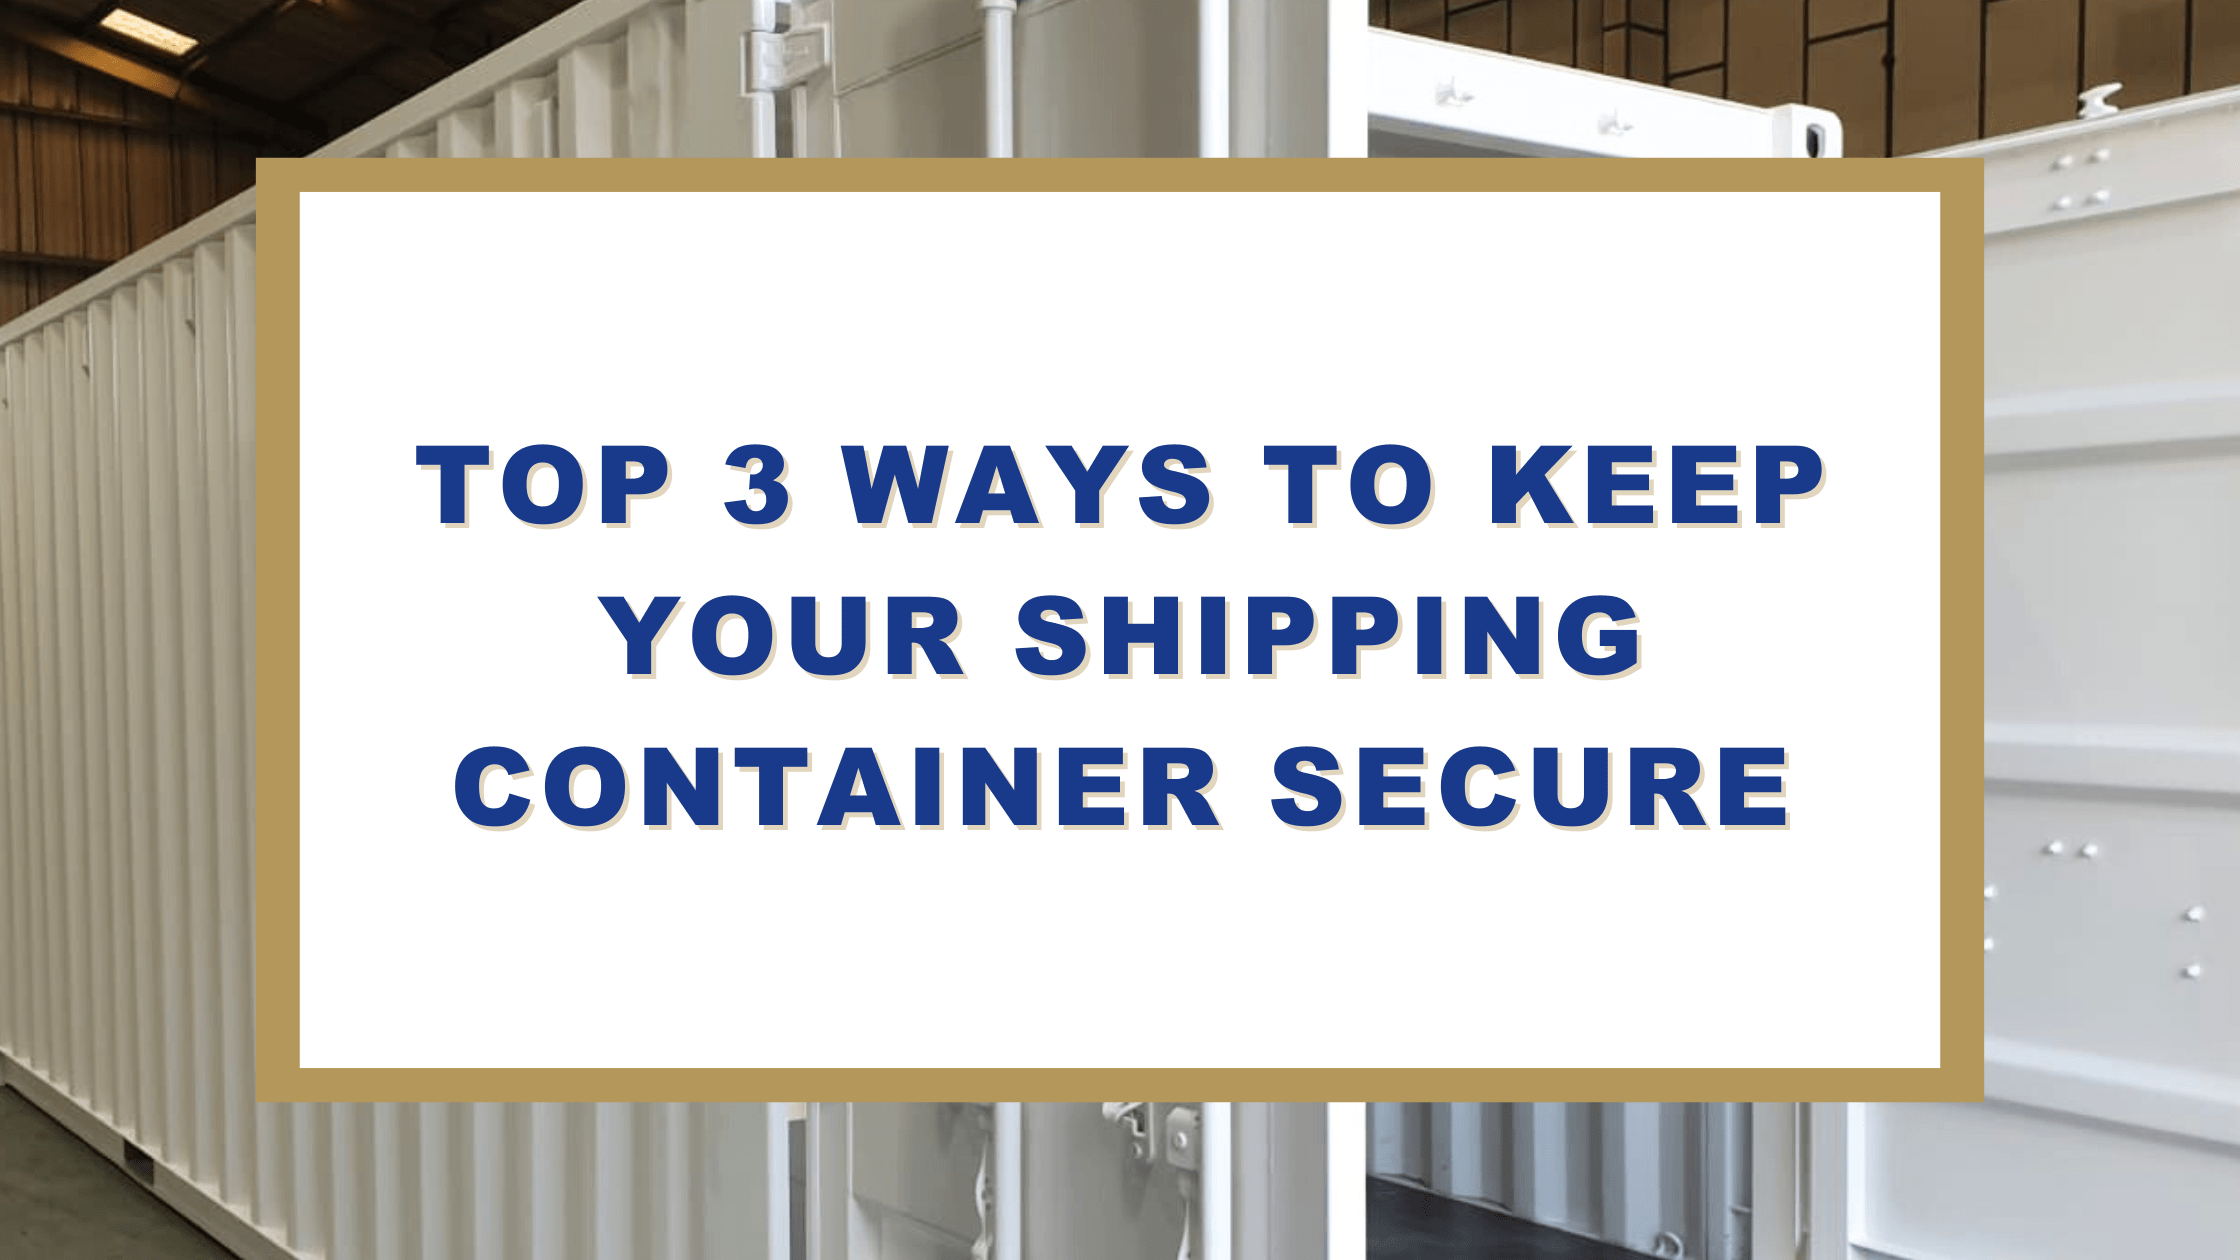 Top 3 Ways To Keep Your Shipping Container Secure